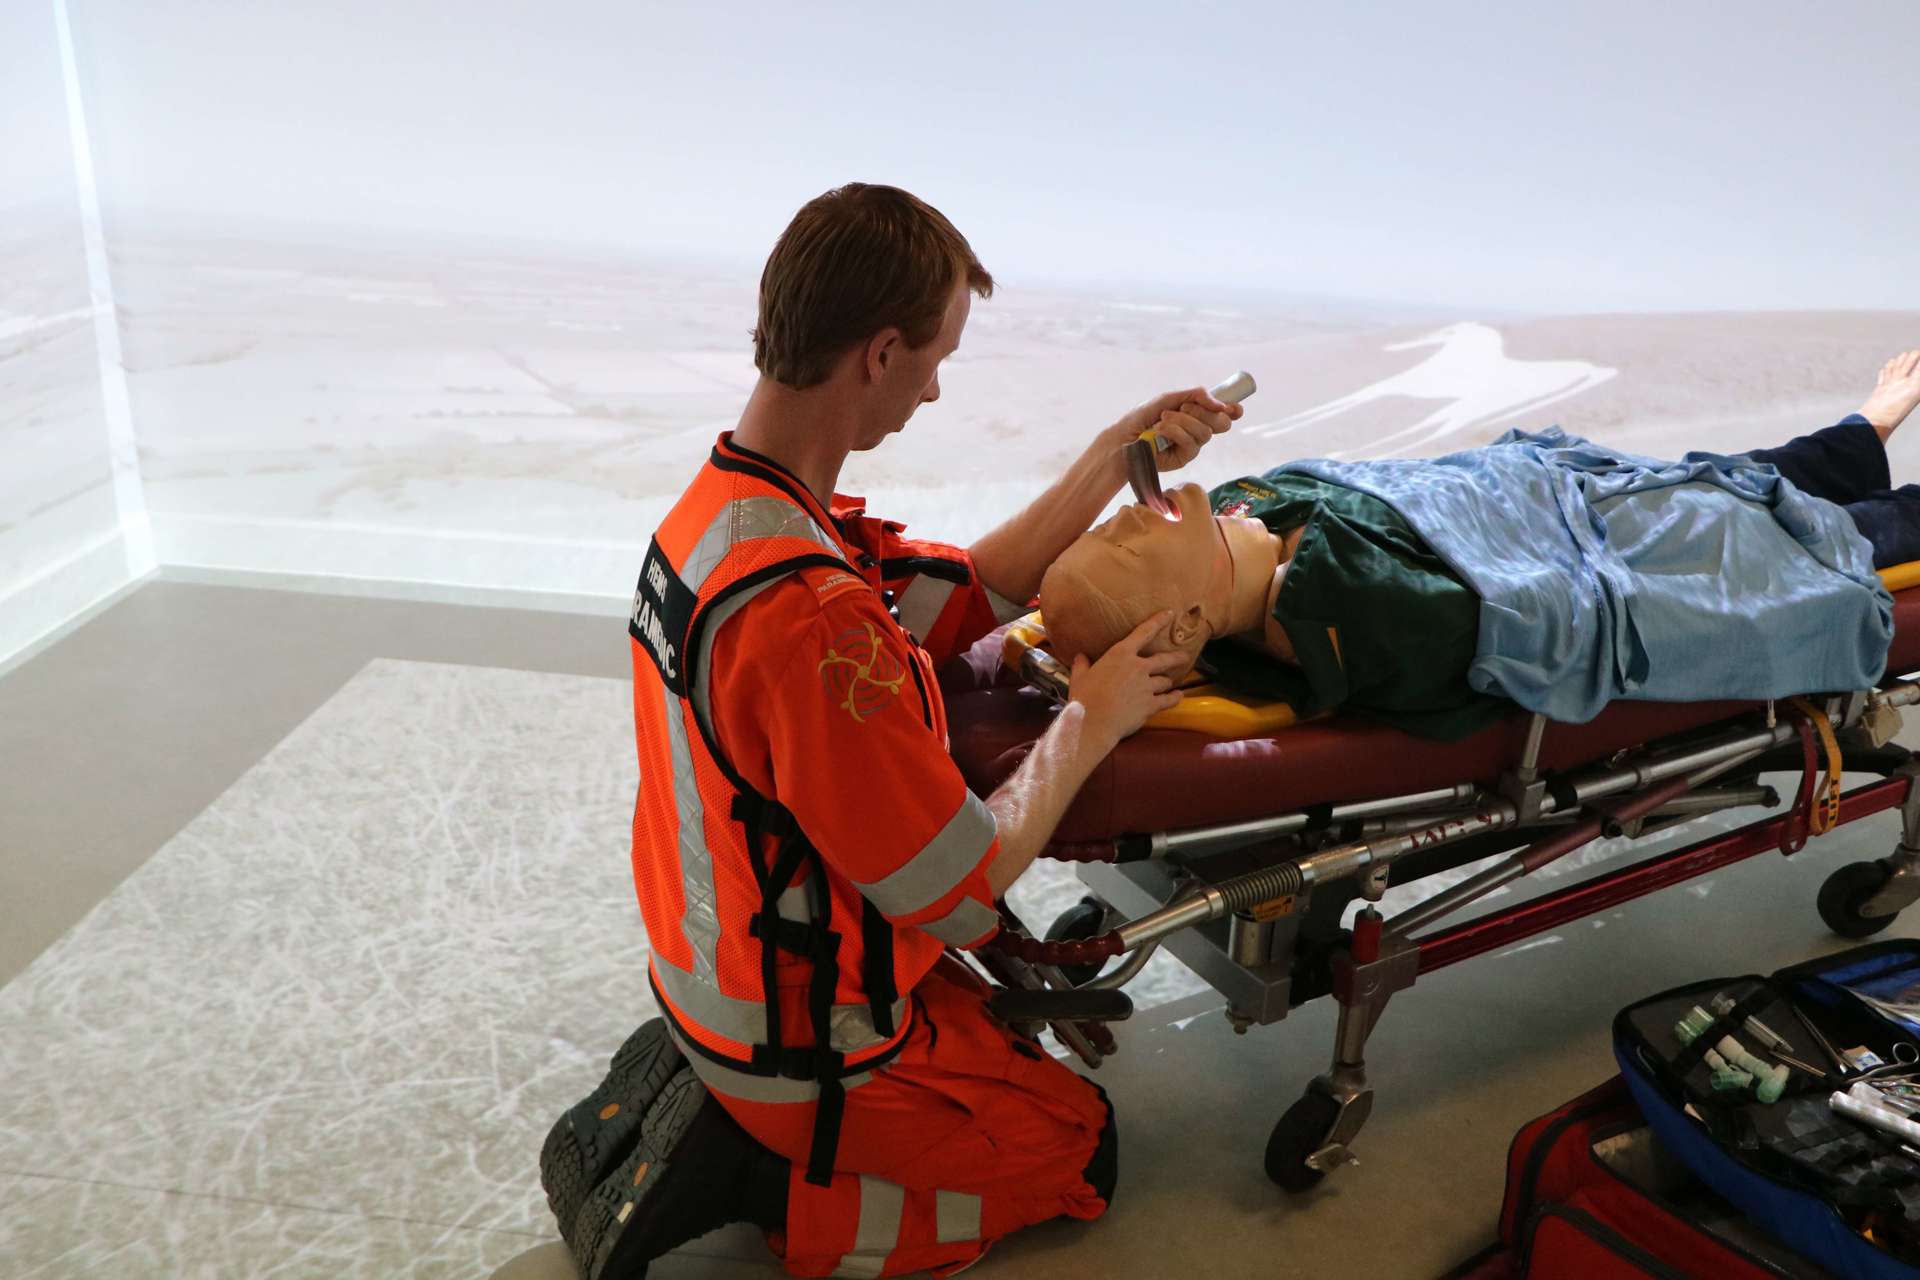 A critical care paramedic doing training in a simulation room using medical equipment and a mannequin.